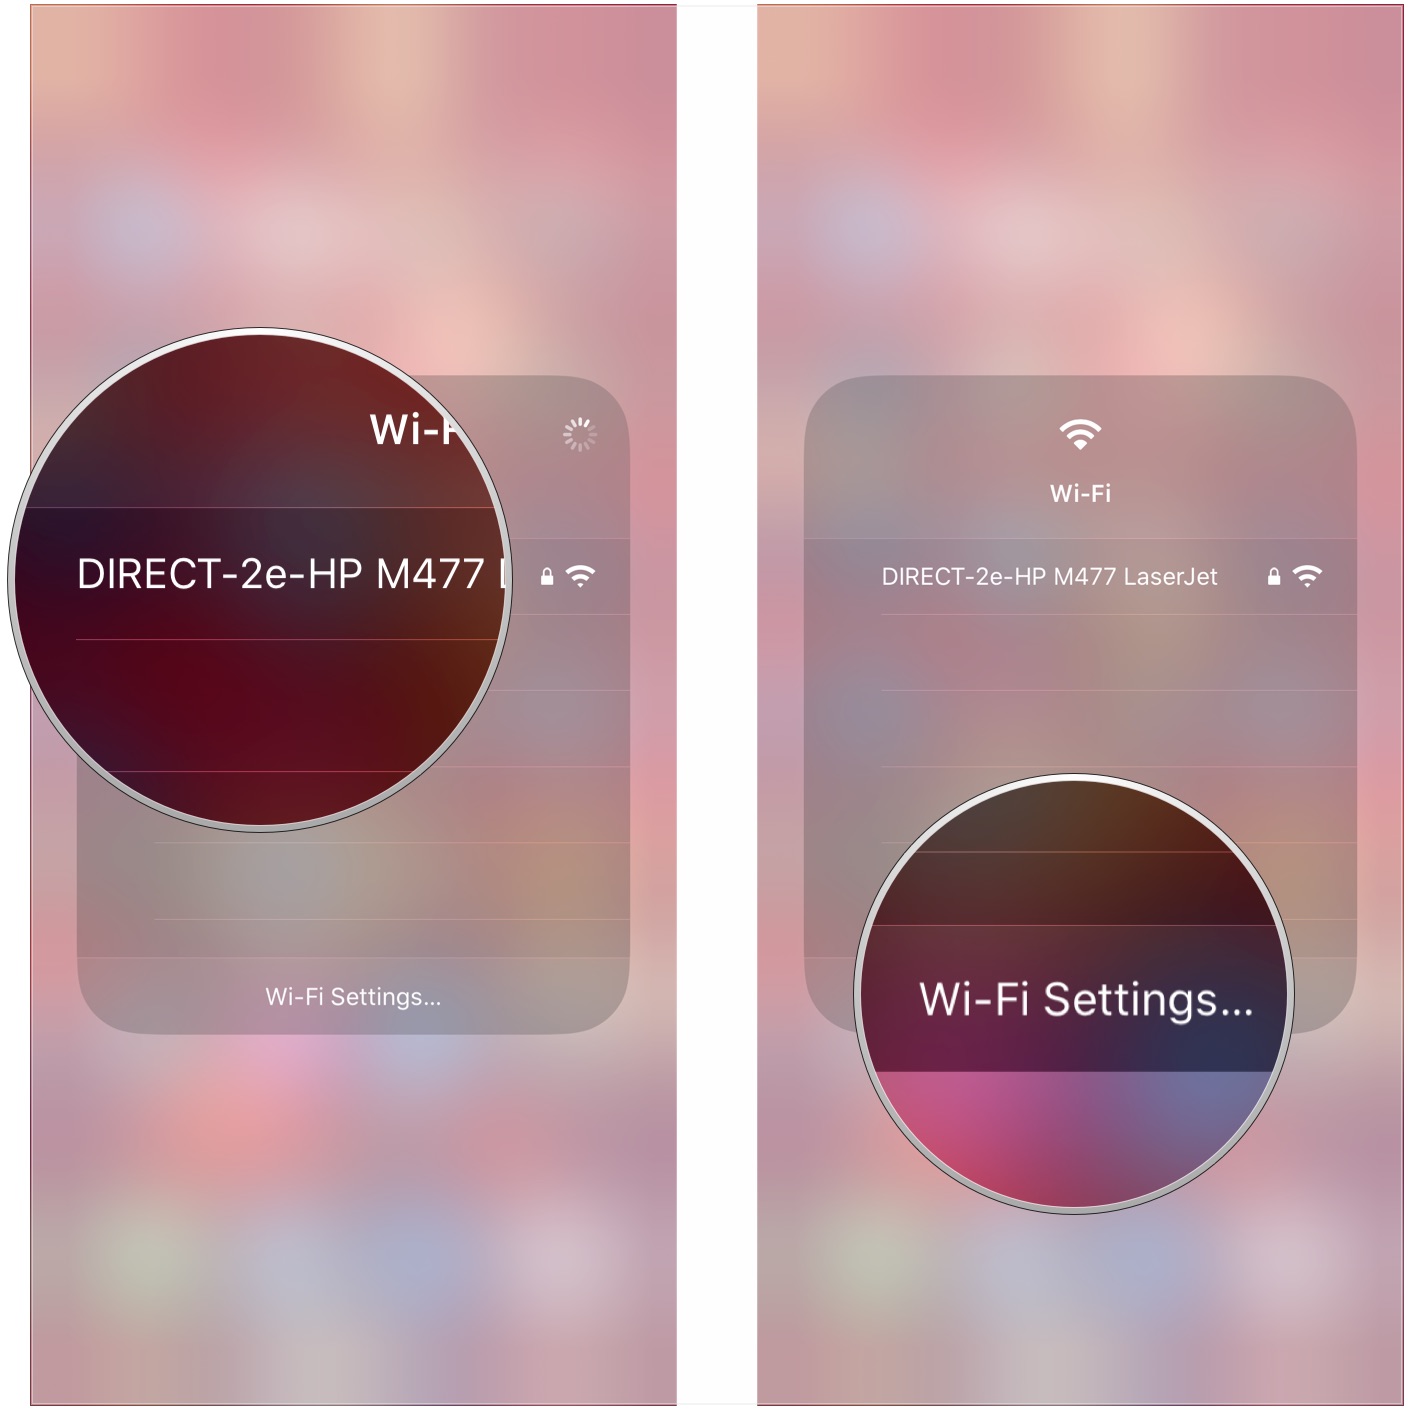 See Control Center actions with Haptic Touch, showing how to tap Wi-Fi network, then tap Wi-Fi settings